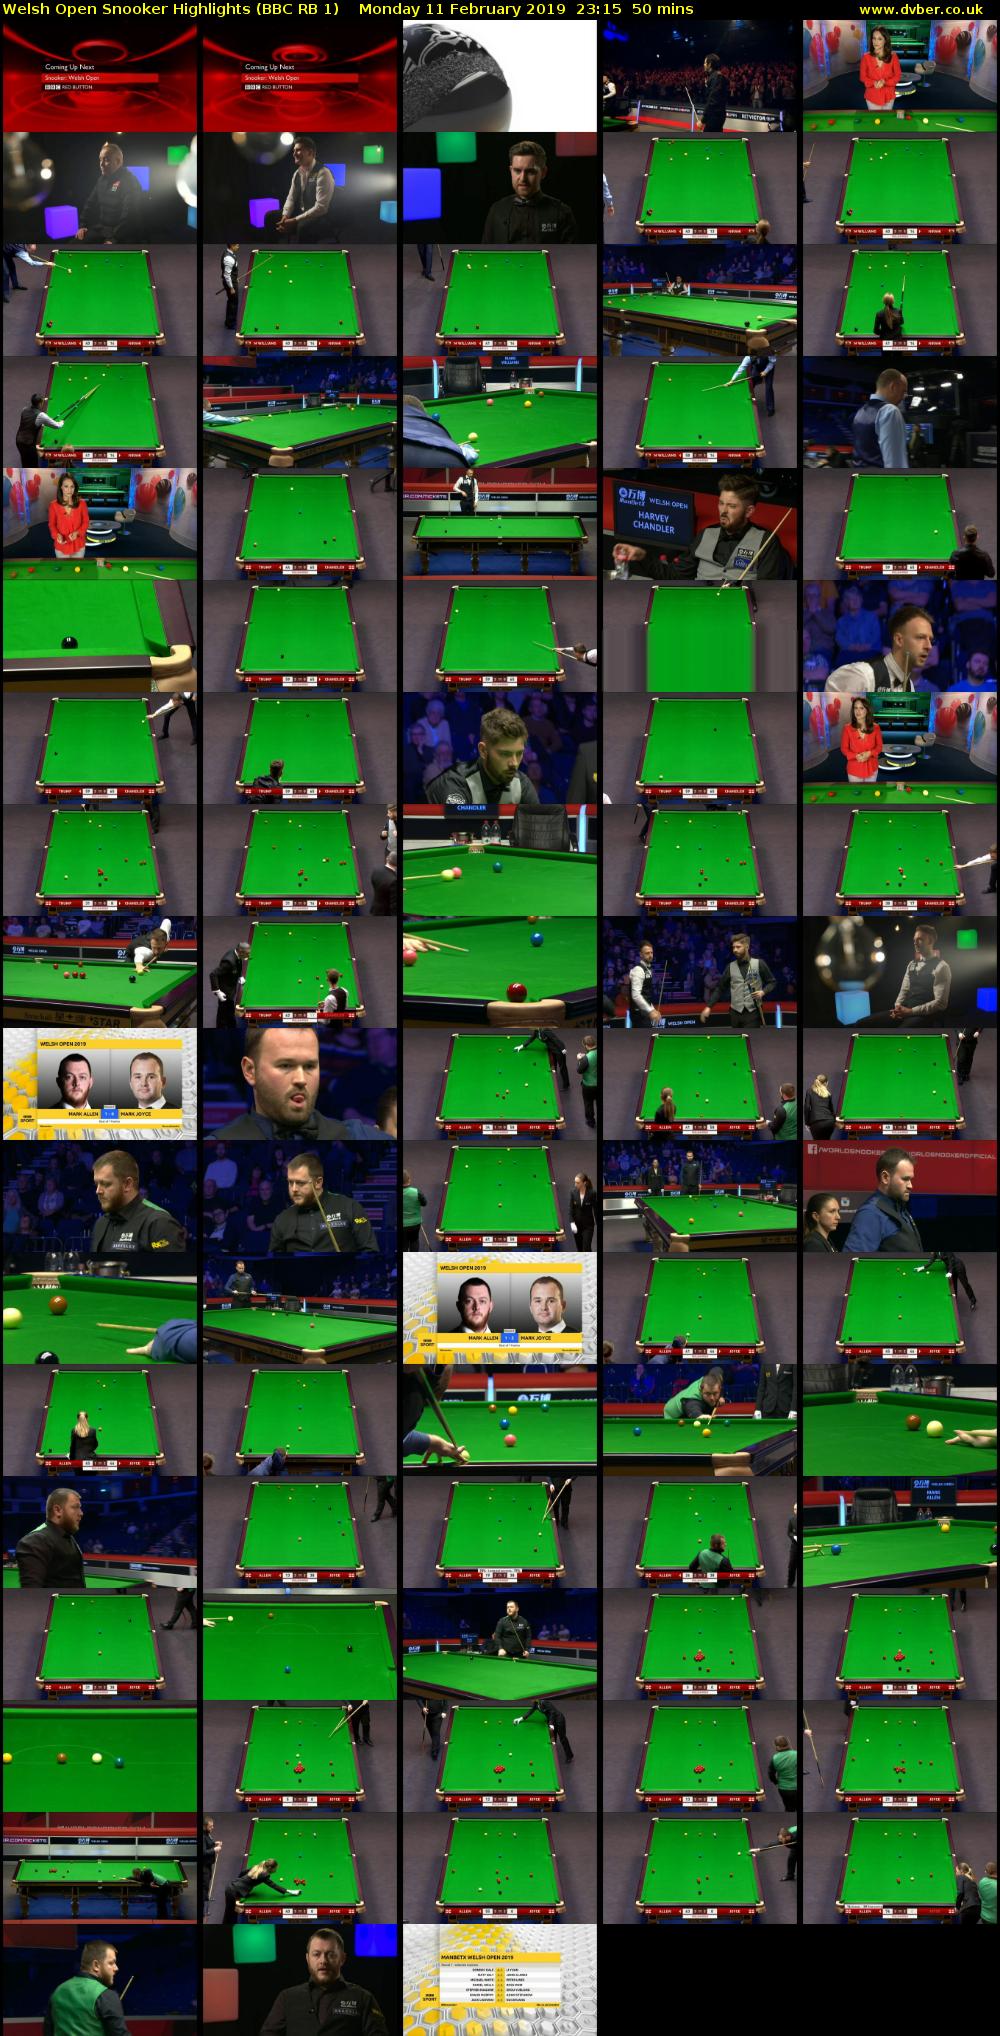 Welsh Open Snooker Highlights (BBC RB 1) Monday 11 February 2019 23:15 - 00:05